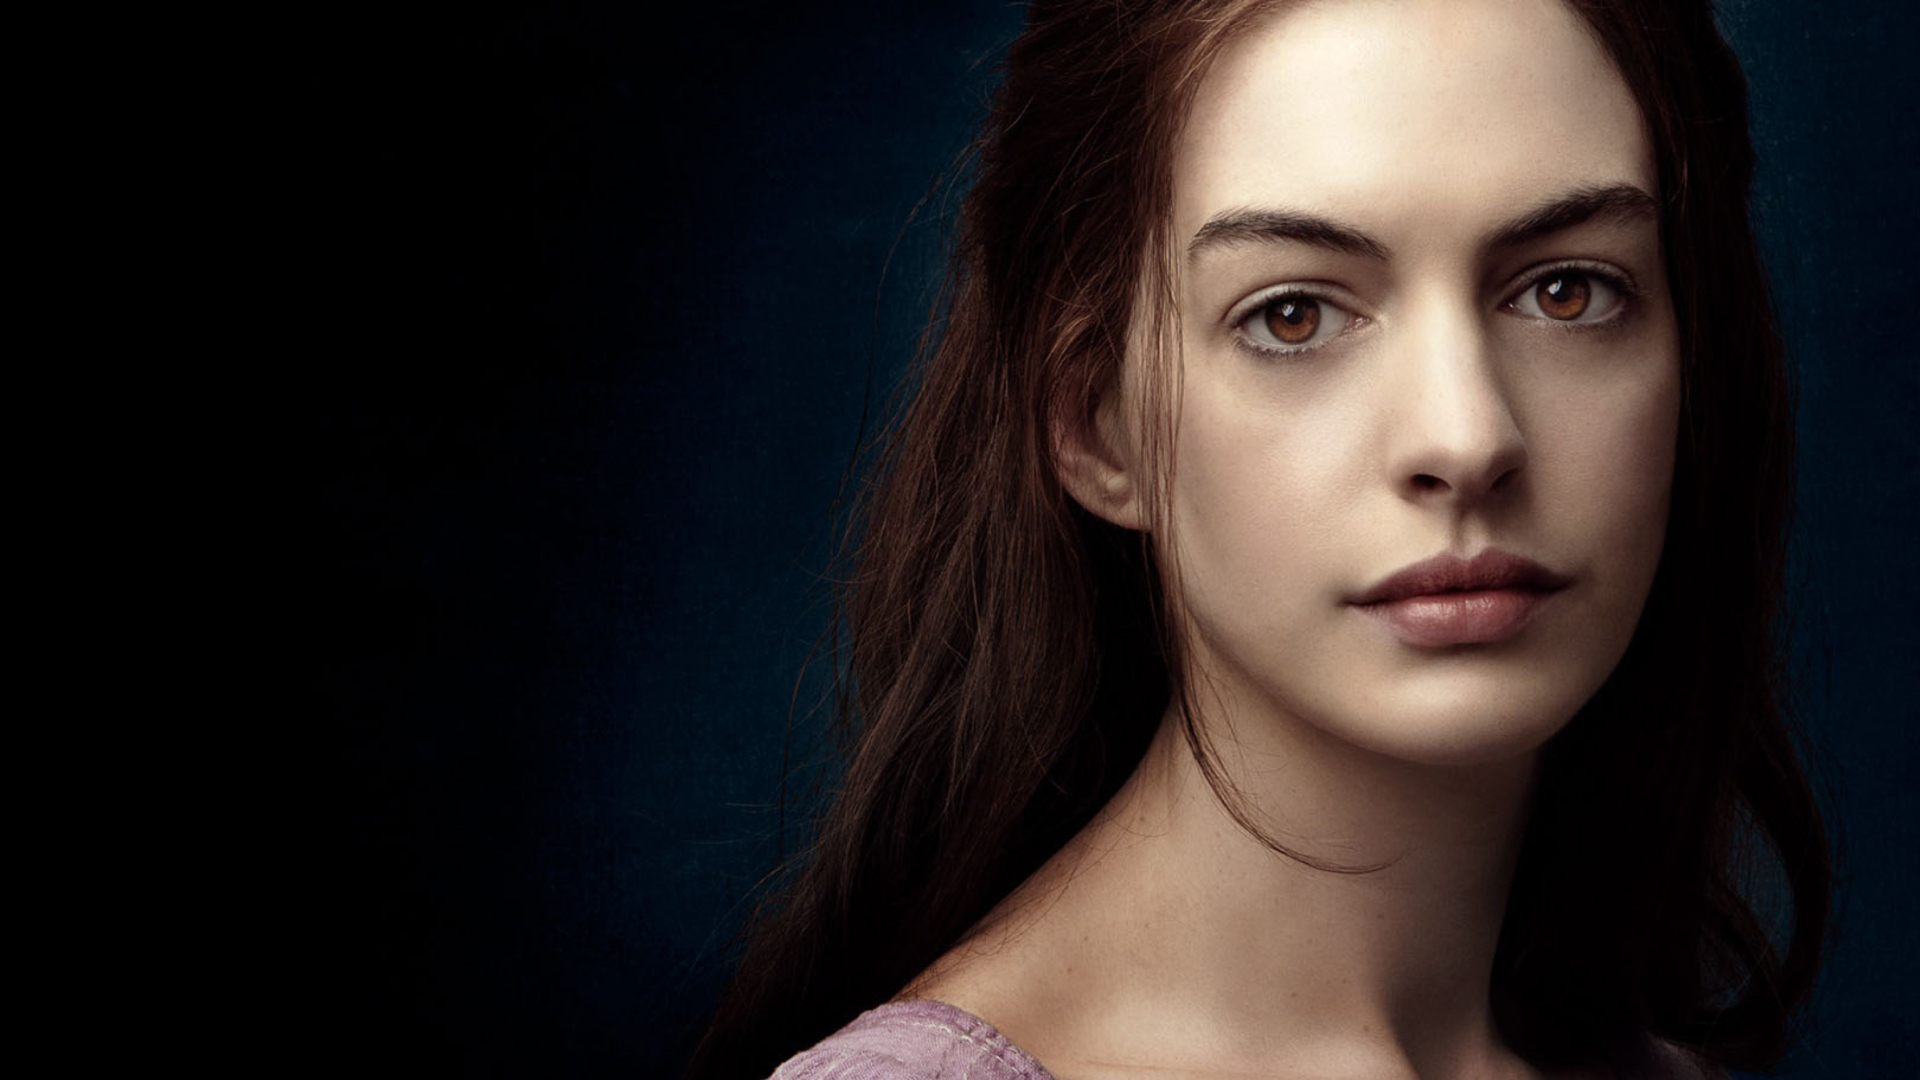 Anne Hathaway In Les Miserables wallpaper 1920x1080